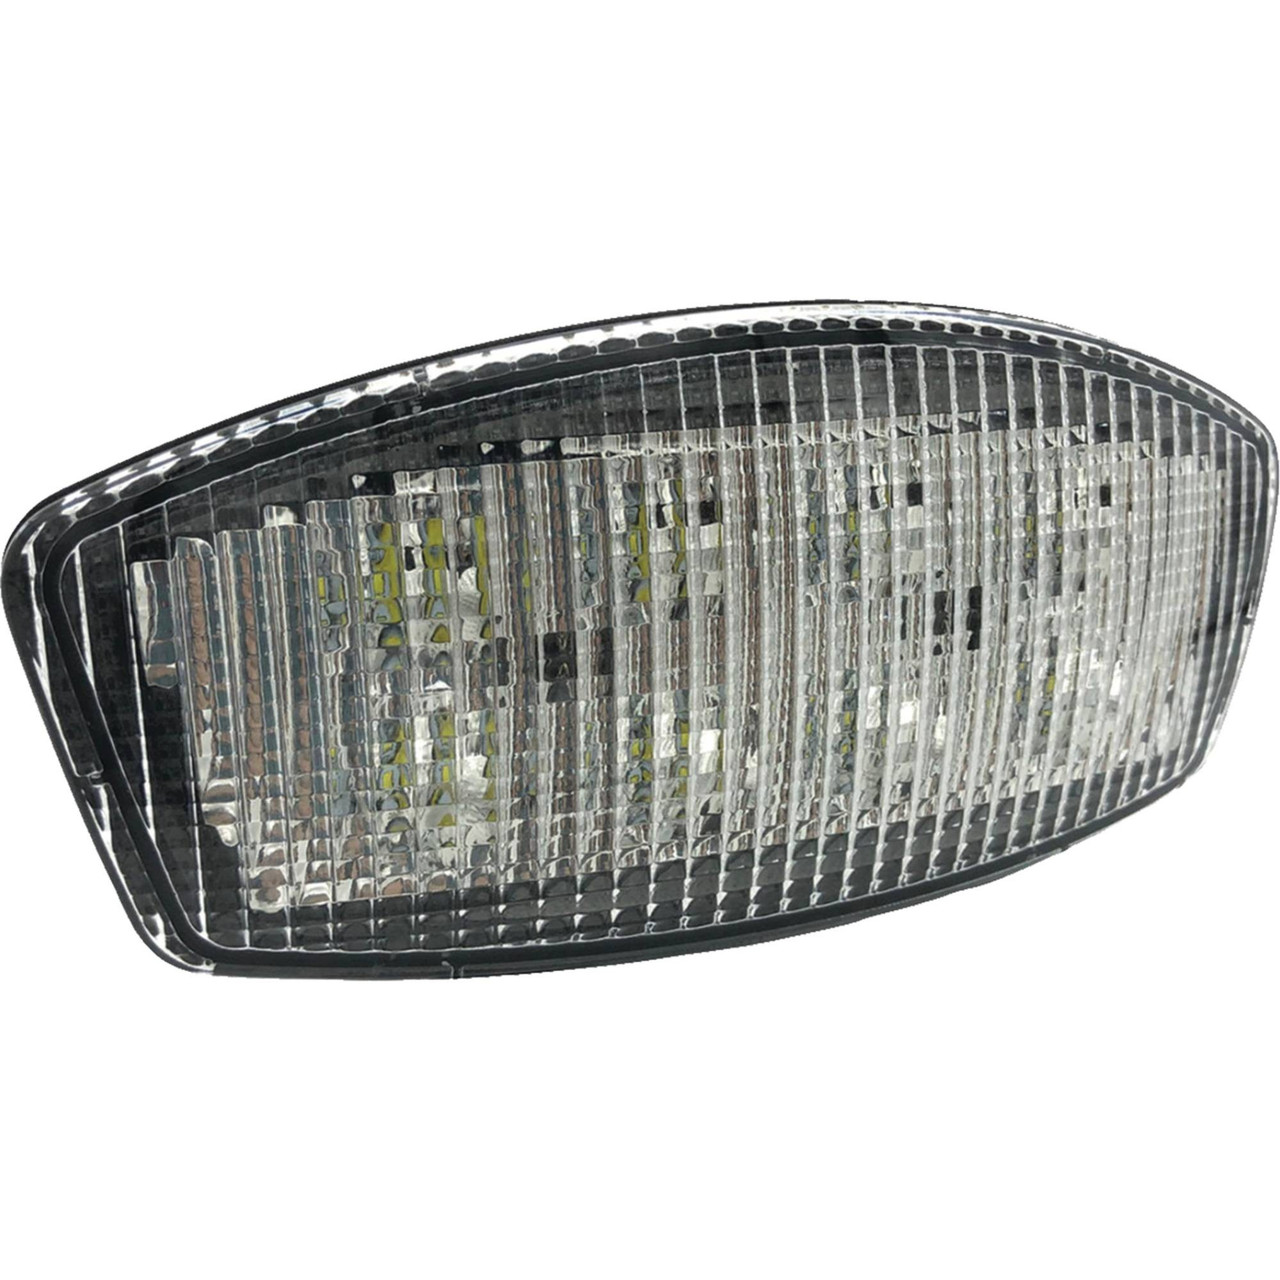 E-TL6025 LED Headlight for Ford / New Holland T6010, T6020, T6030